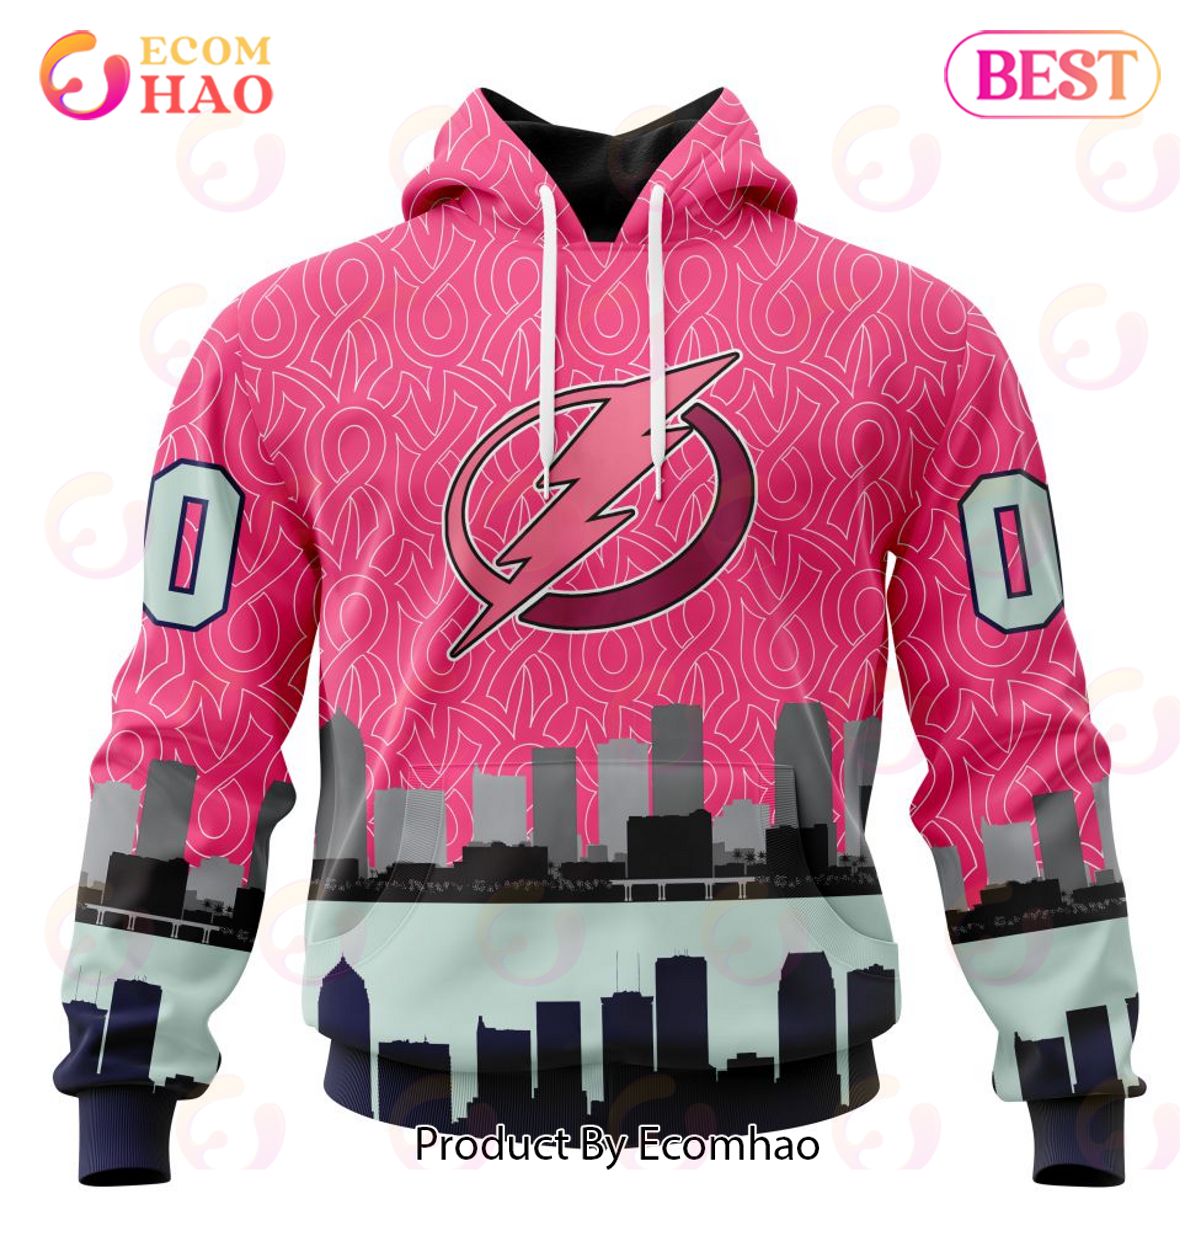 NHL Tampa Bay Lightning Specialized Unisex Kits Hockey Fights Against Cancer 3D Hoodie